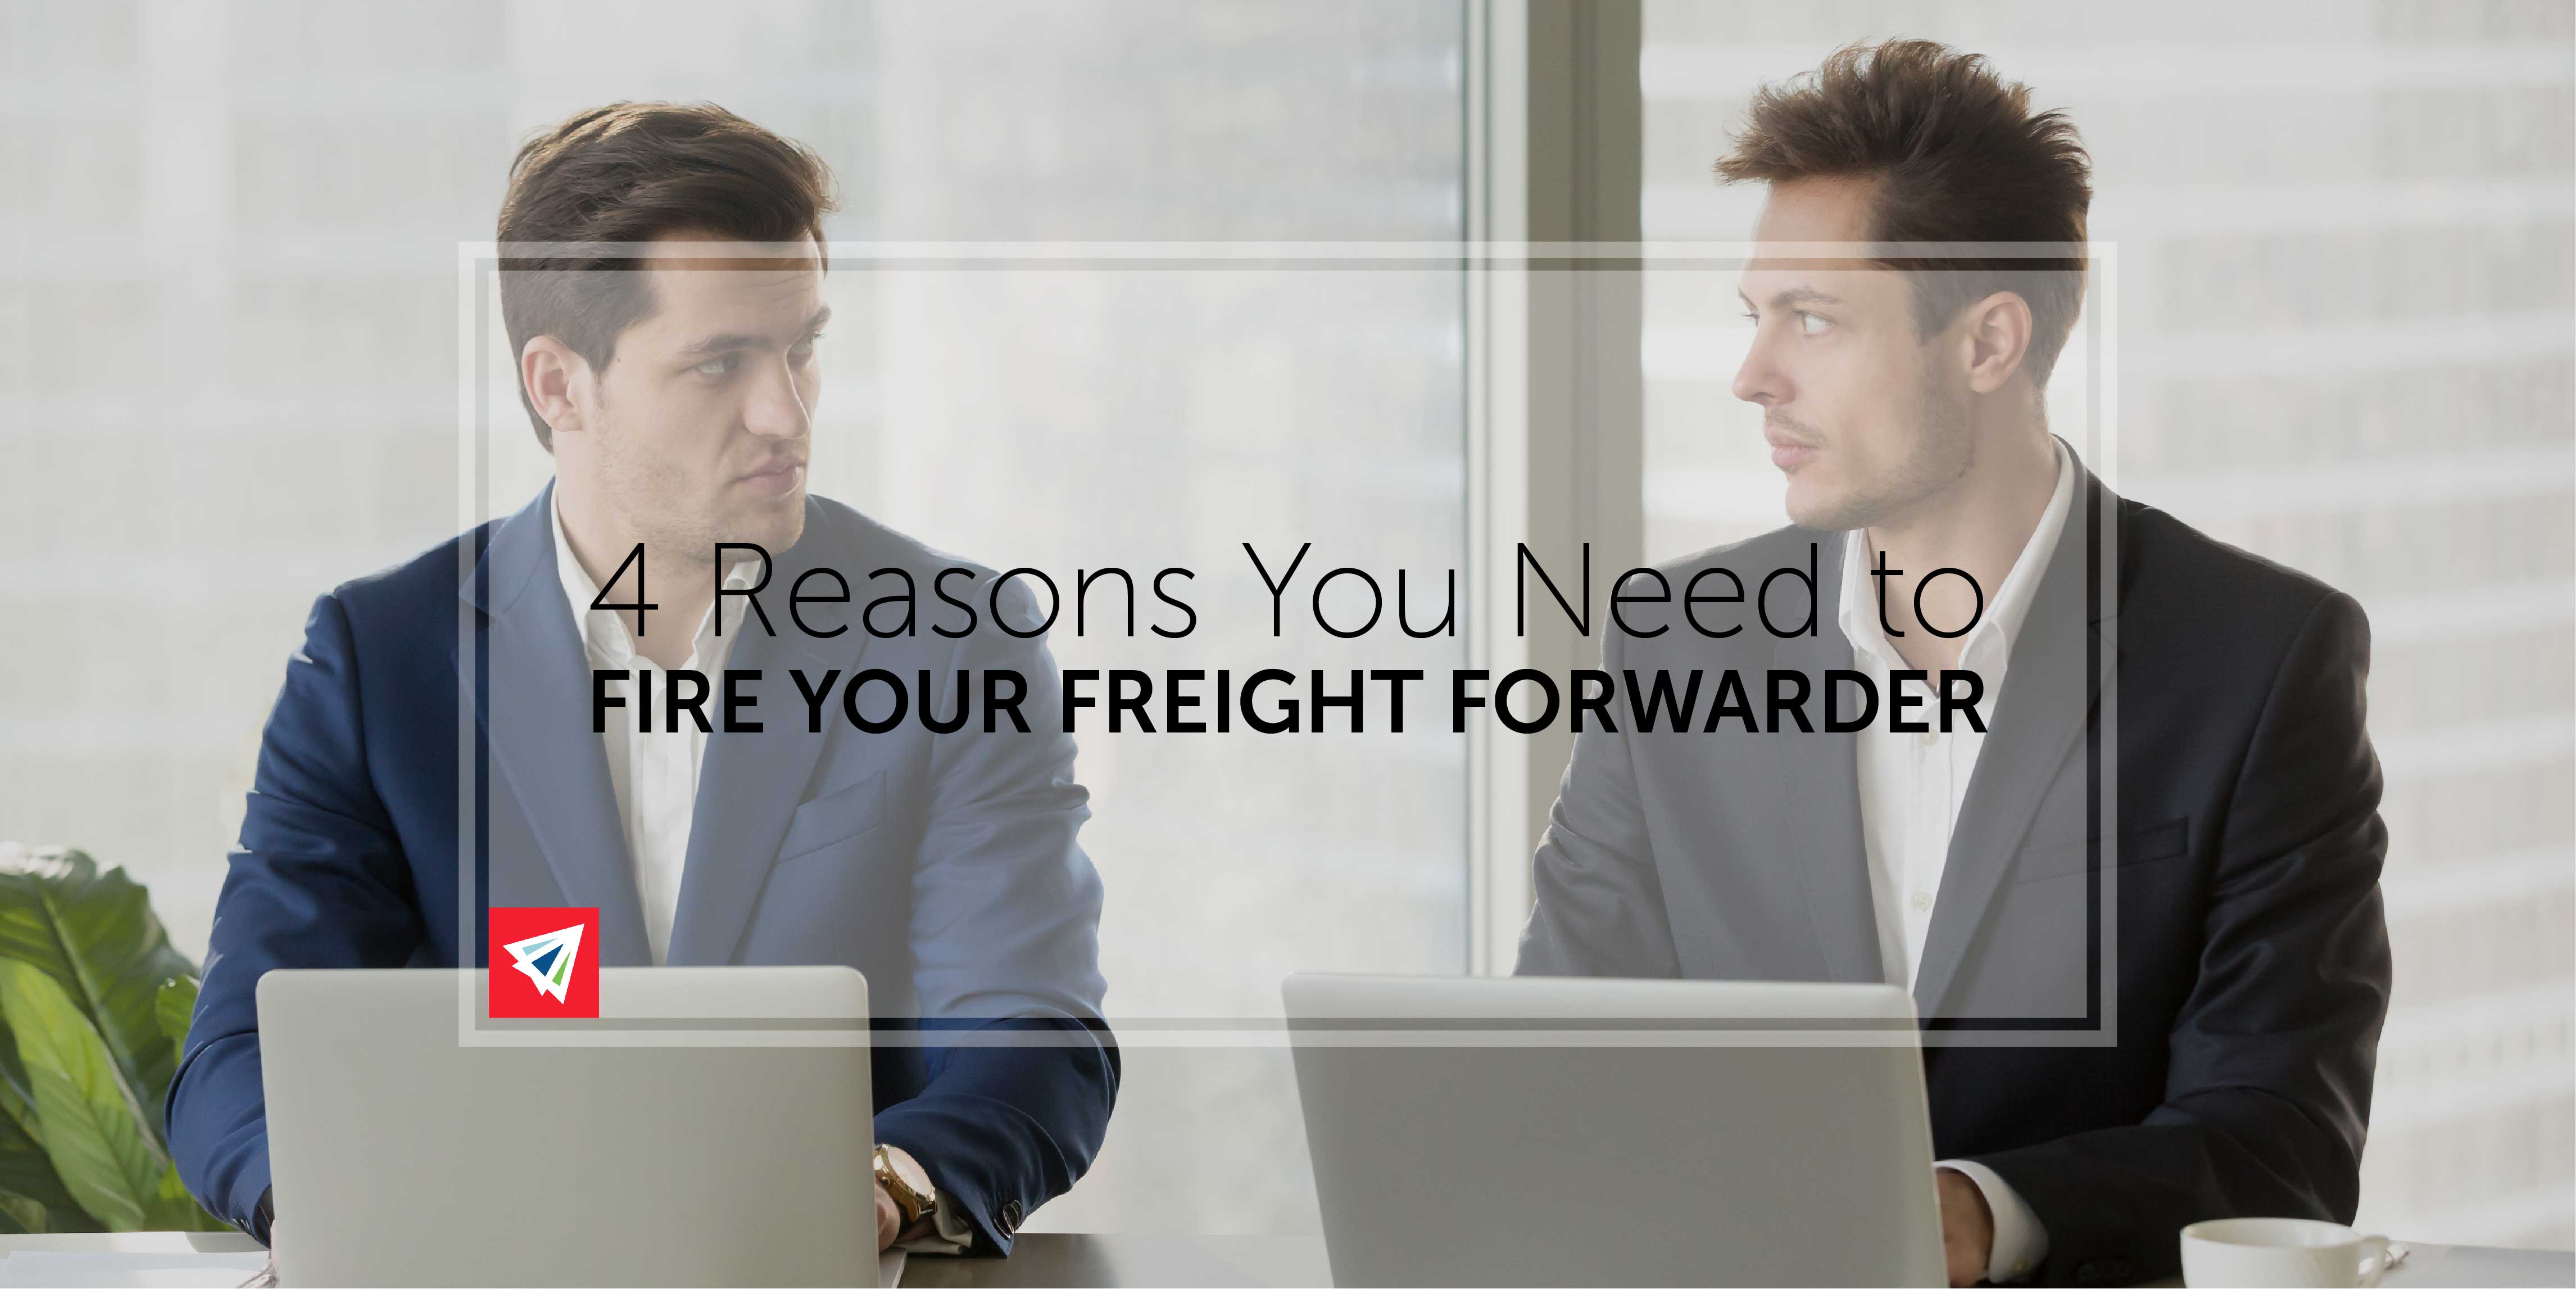 4 Reasons You Need to Fire Your Freight Forwarder